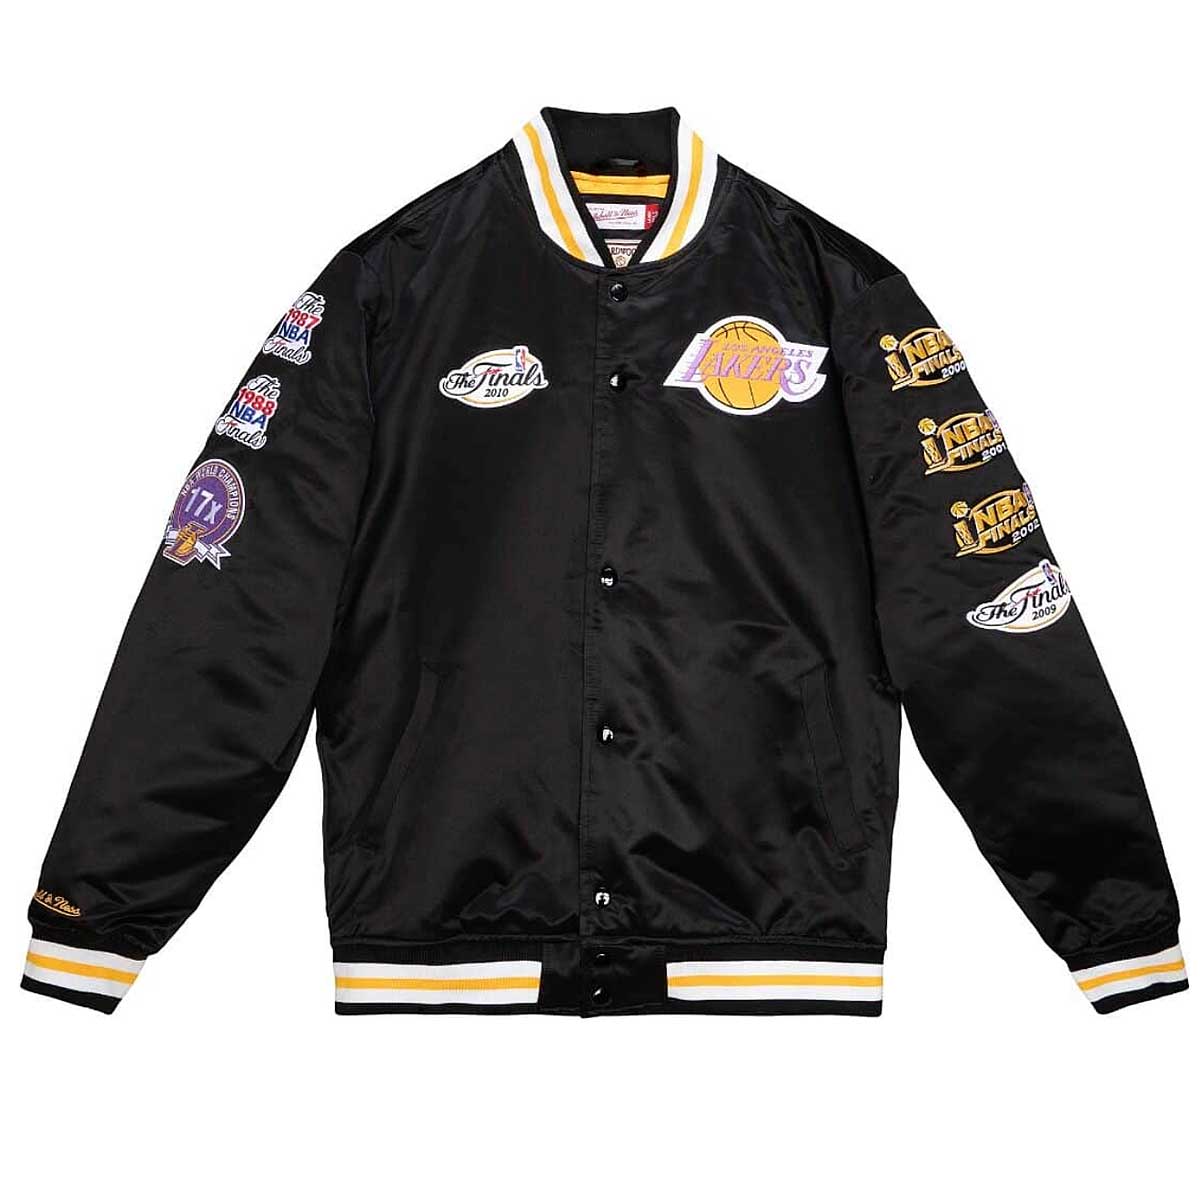 NBA Finals Los Angeles Lakers NBA Jackets for sale